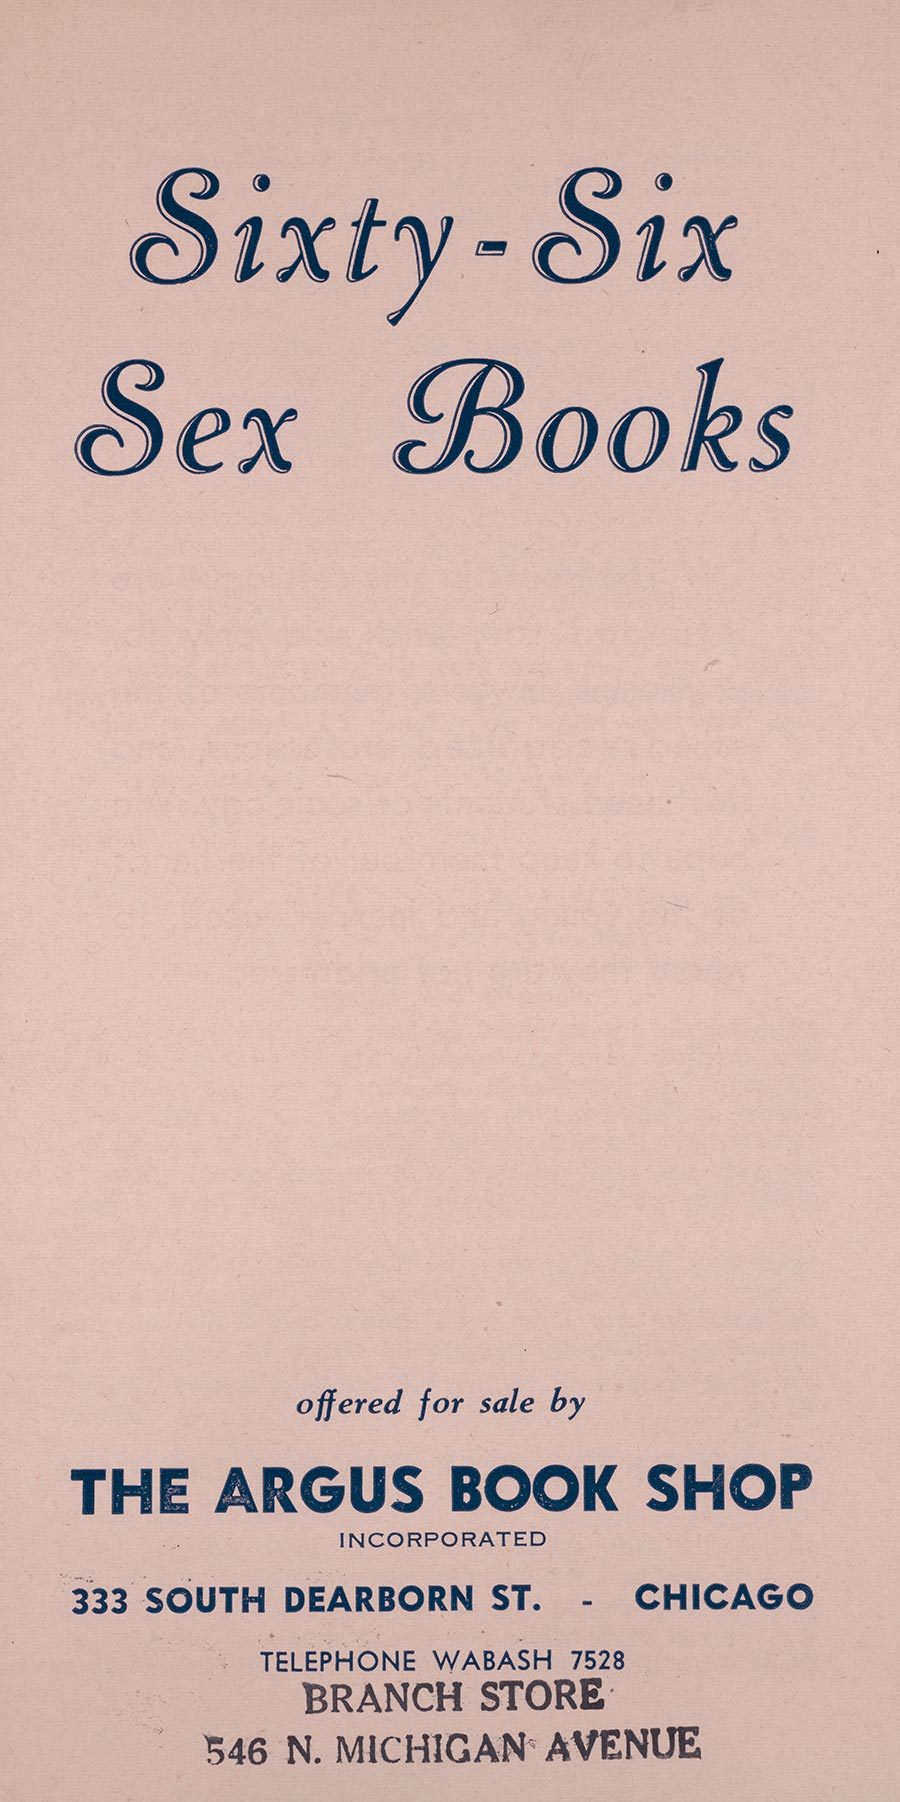 “Sixty-Six Sex Books” catalog cover with info for Argus Book Shop at the bottom.